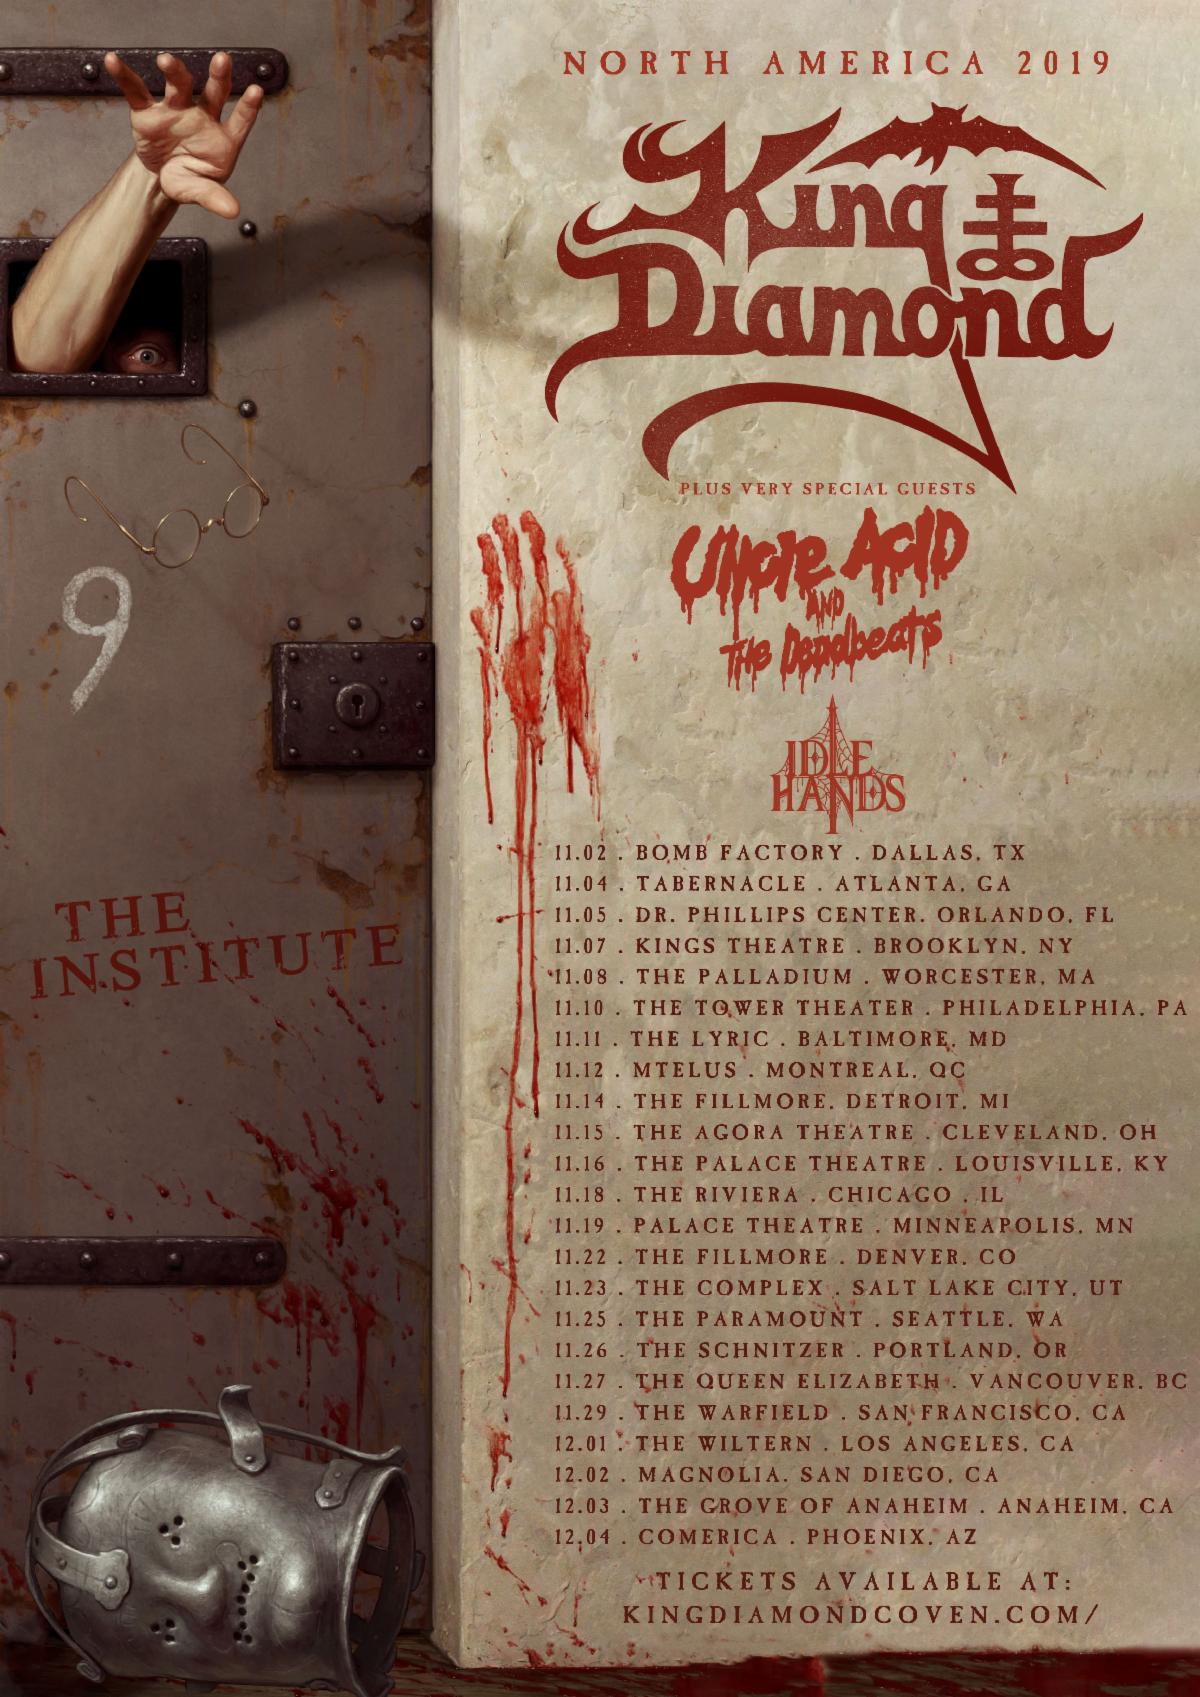 King Diamond At The Modell Lyric In Baltimore, MD 11-11-2019